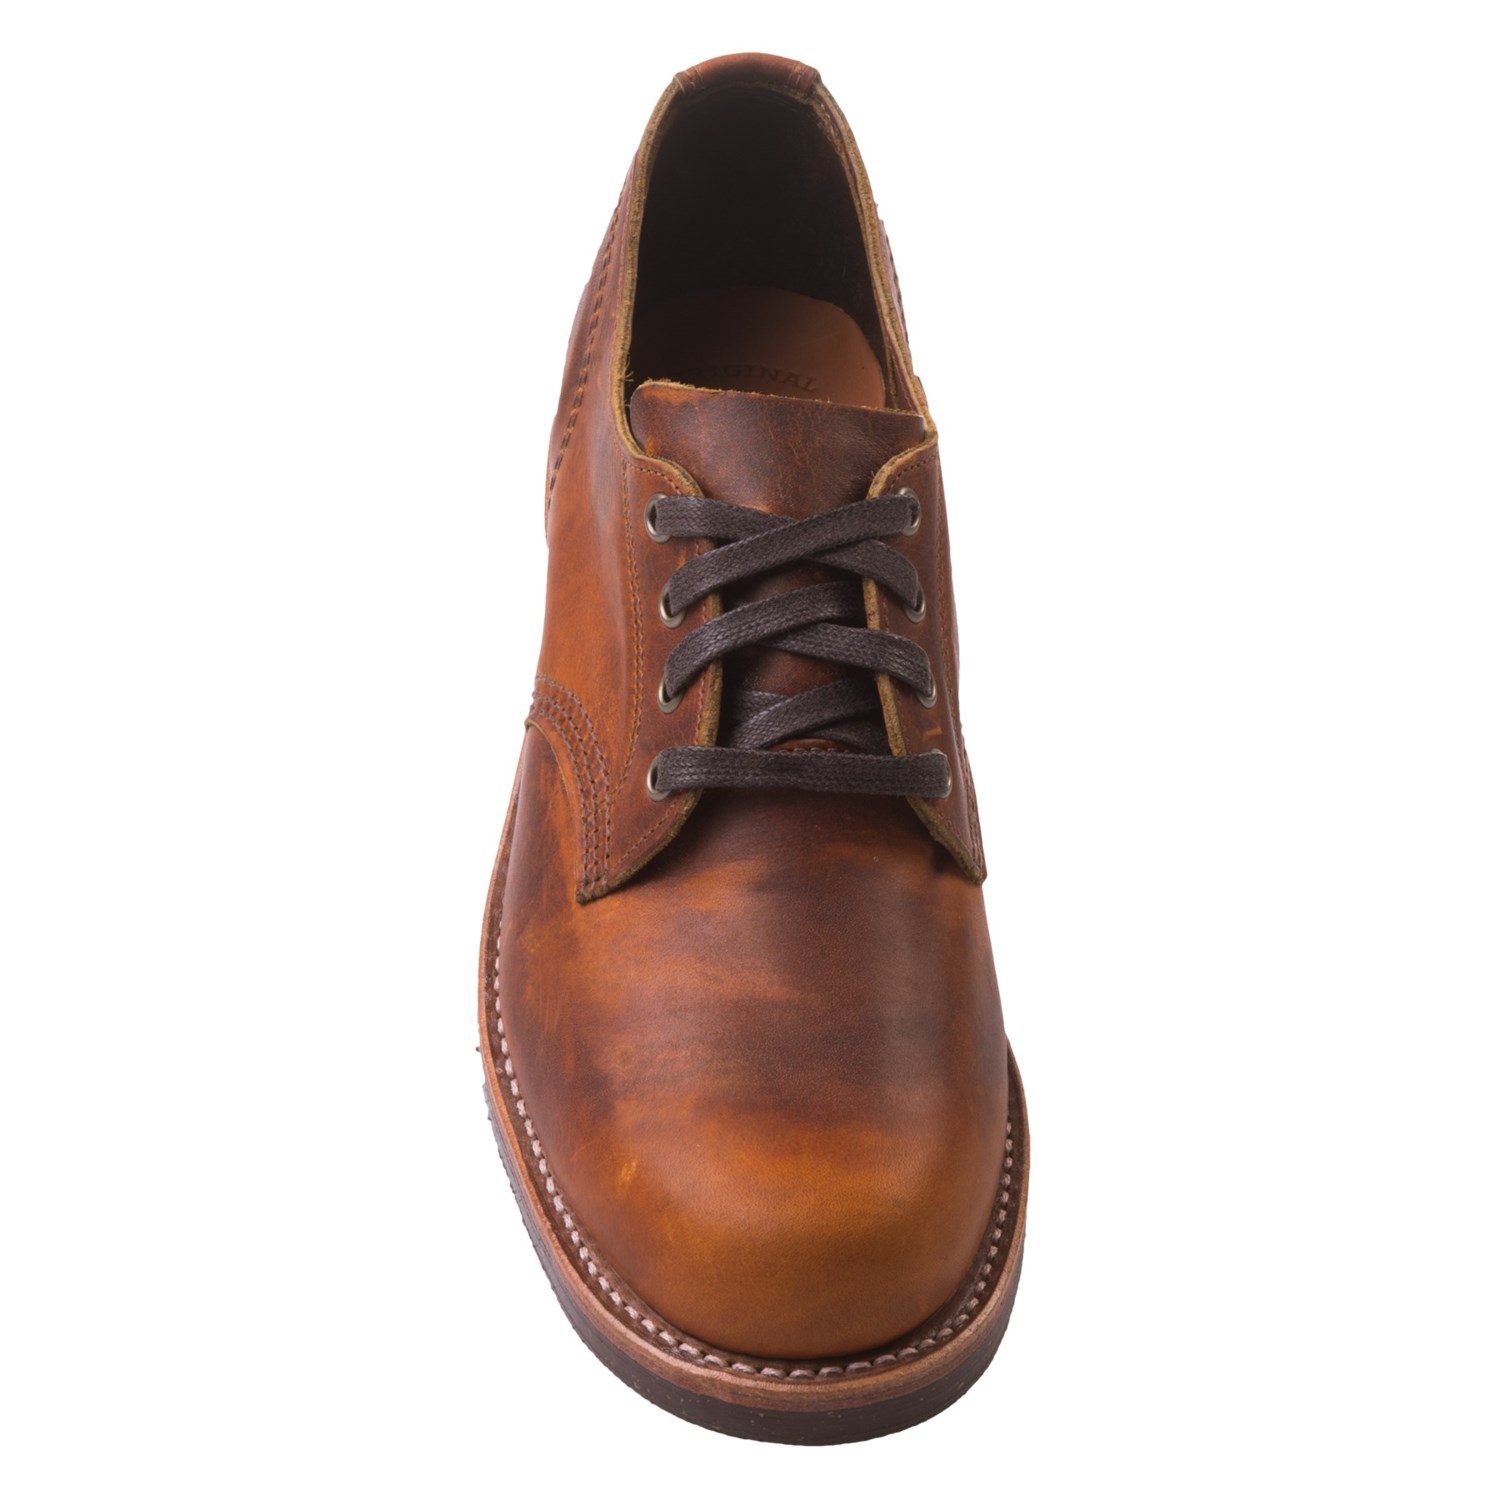 Chippewa General Utility Service Oxford Shoes (For Men) - Save 50%